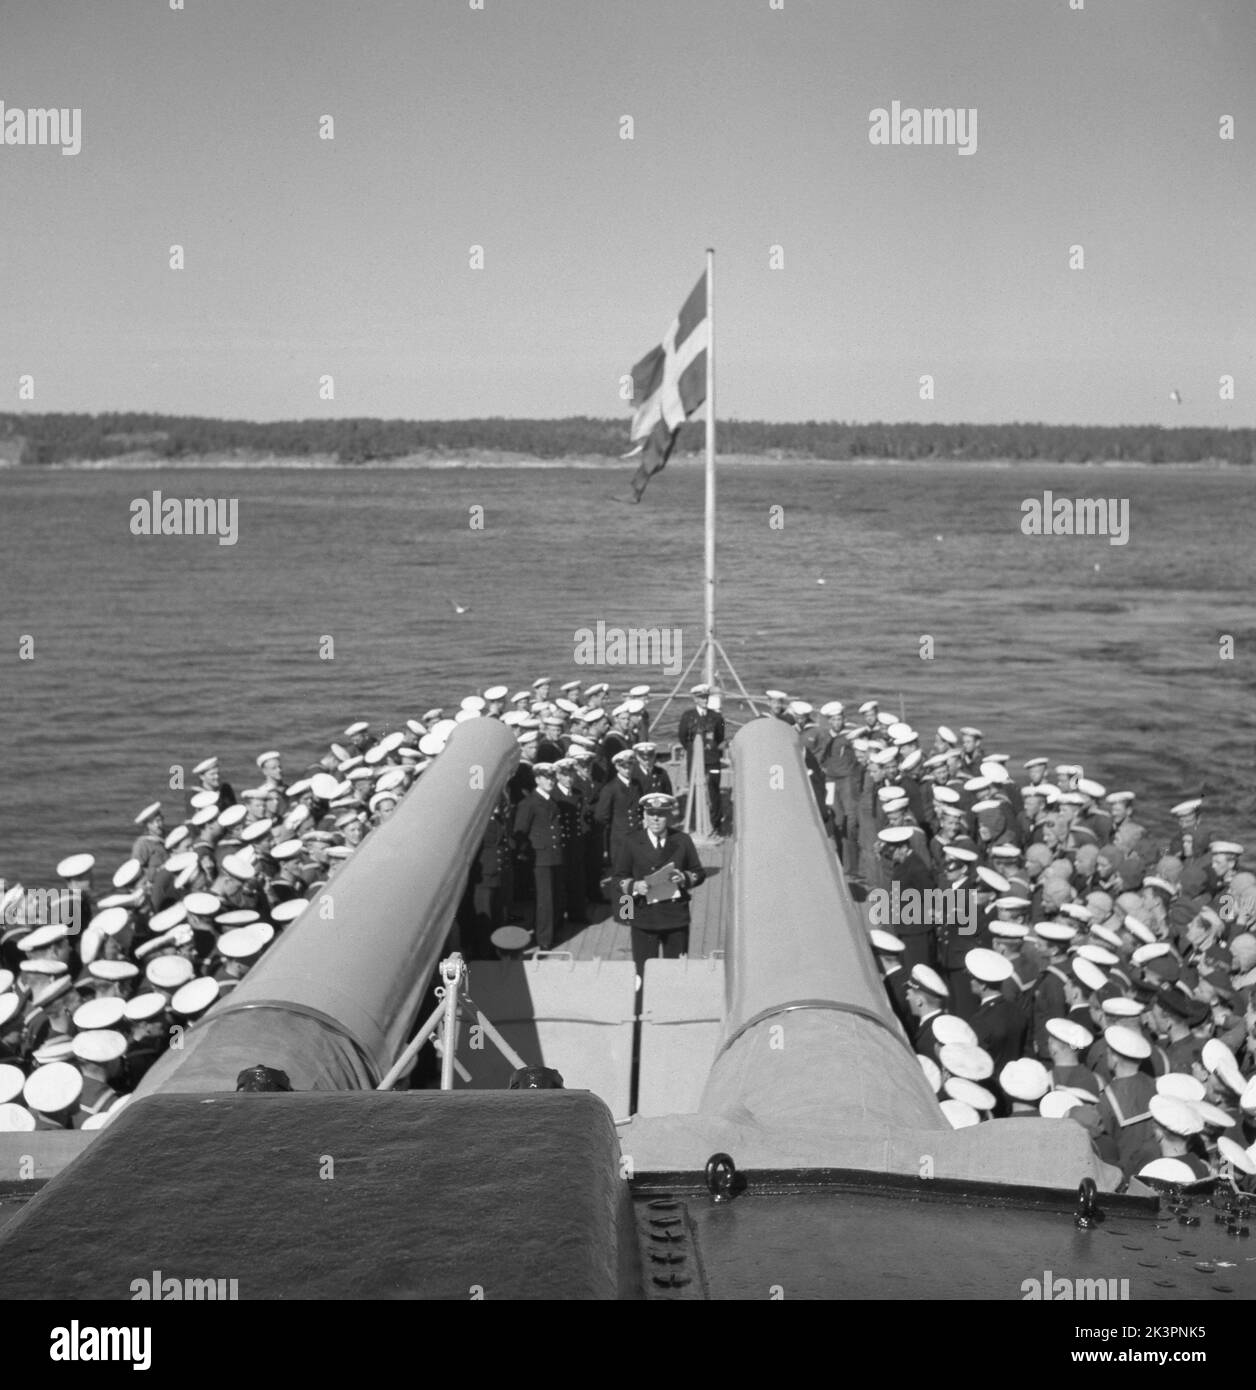 During World war II. The war ship Sverige during navy exercises at sea. The crew is gathered on deck with the captain of the ship in the middle. Sweden june 1940. Kristoffersson ref 141 Stock Photo